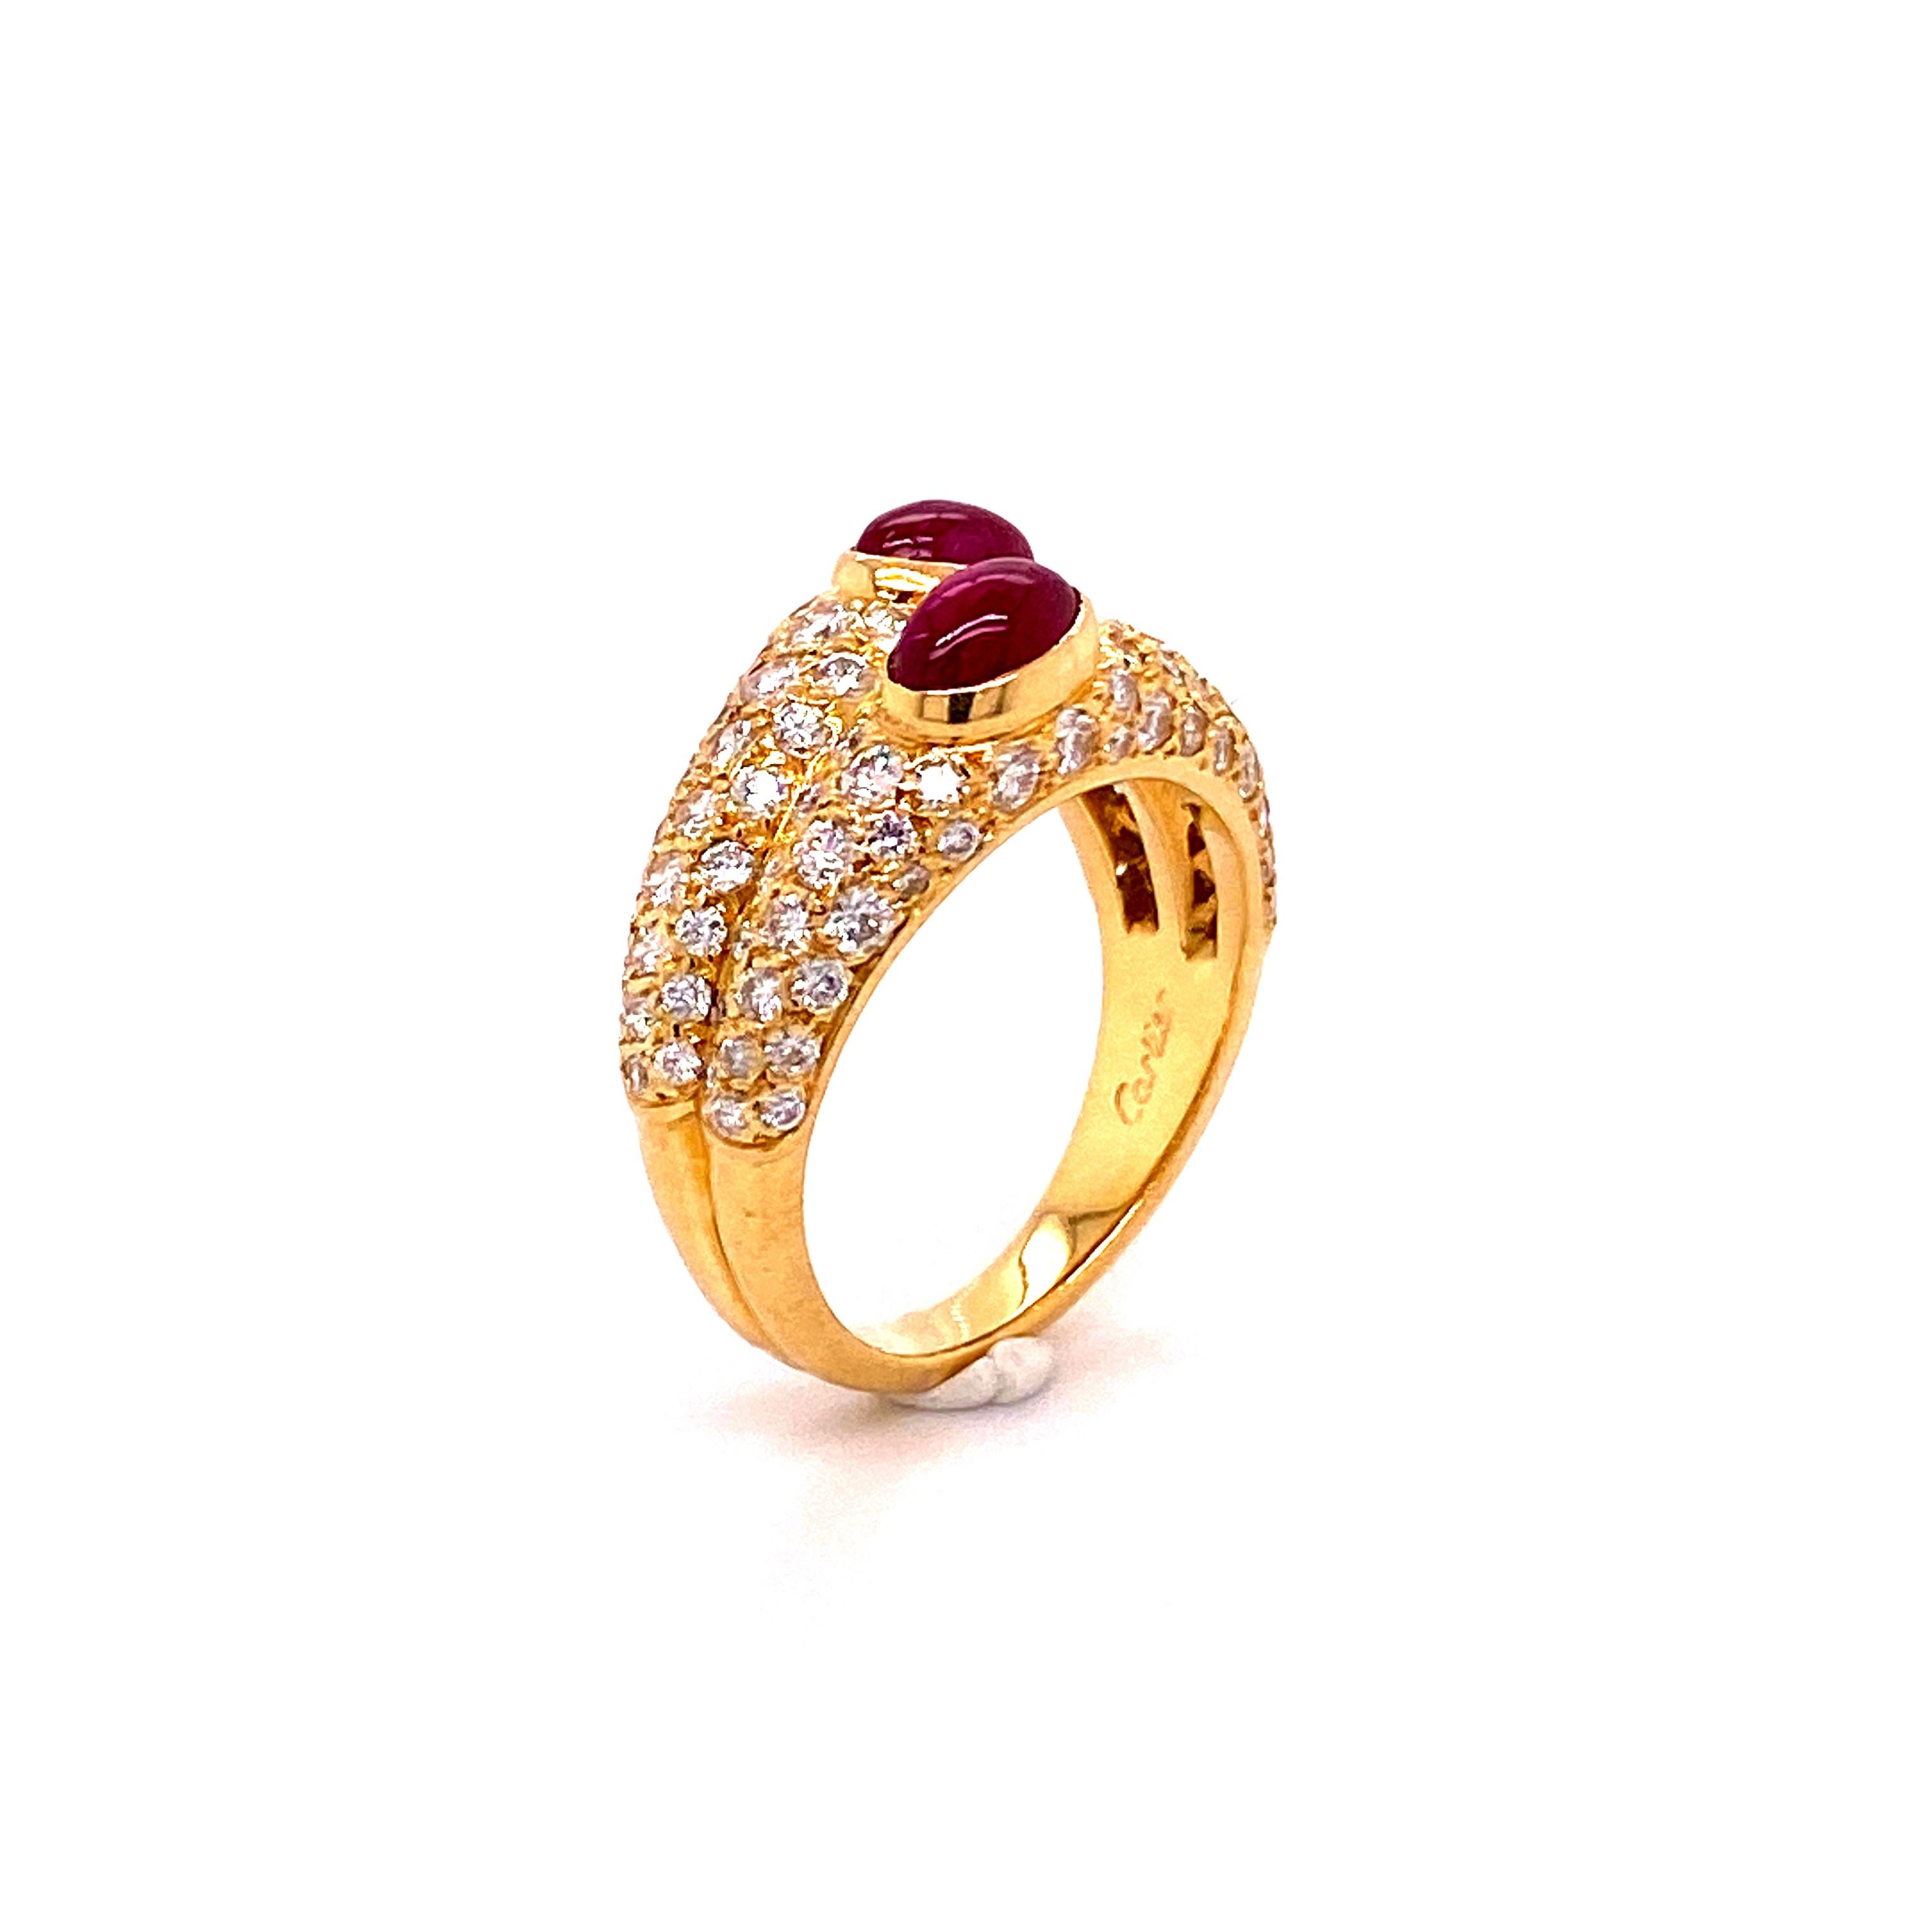 Cartier Ruby and Diamond Ring in 18 Karat Yellow Gold 3